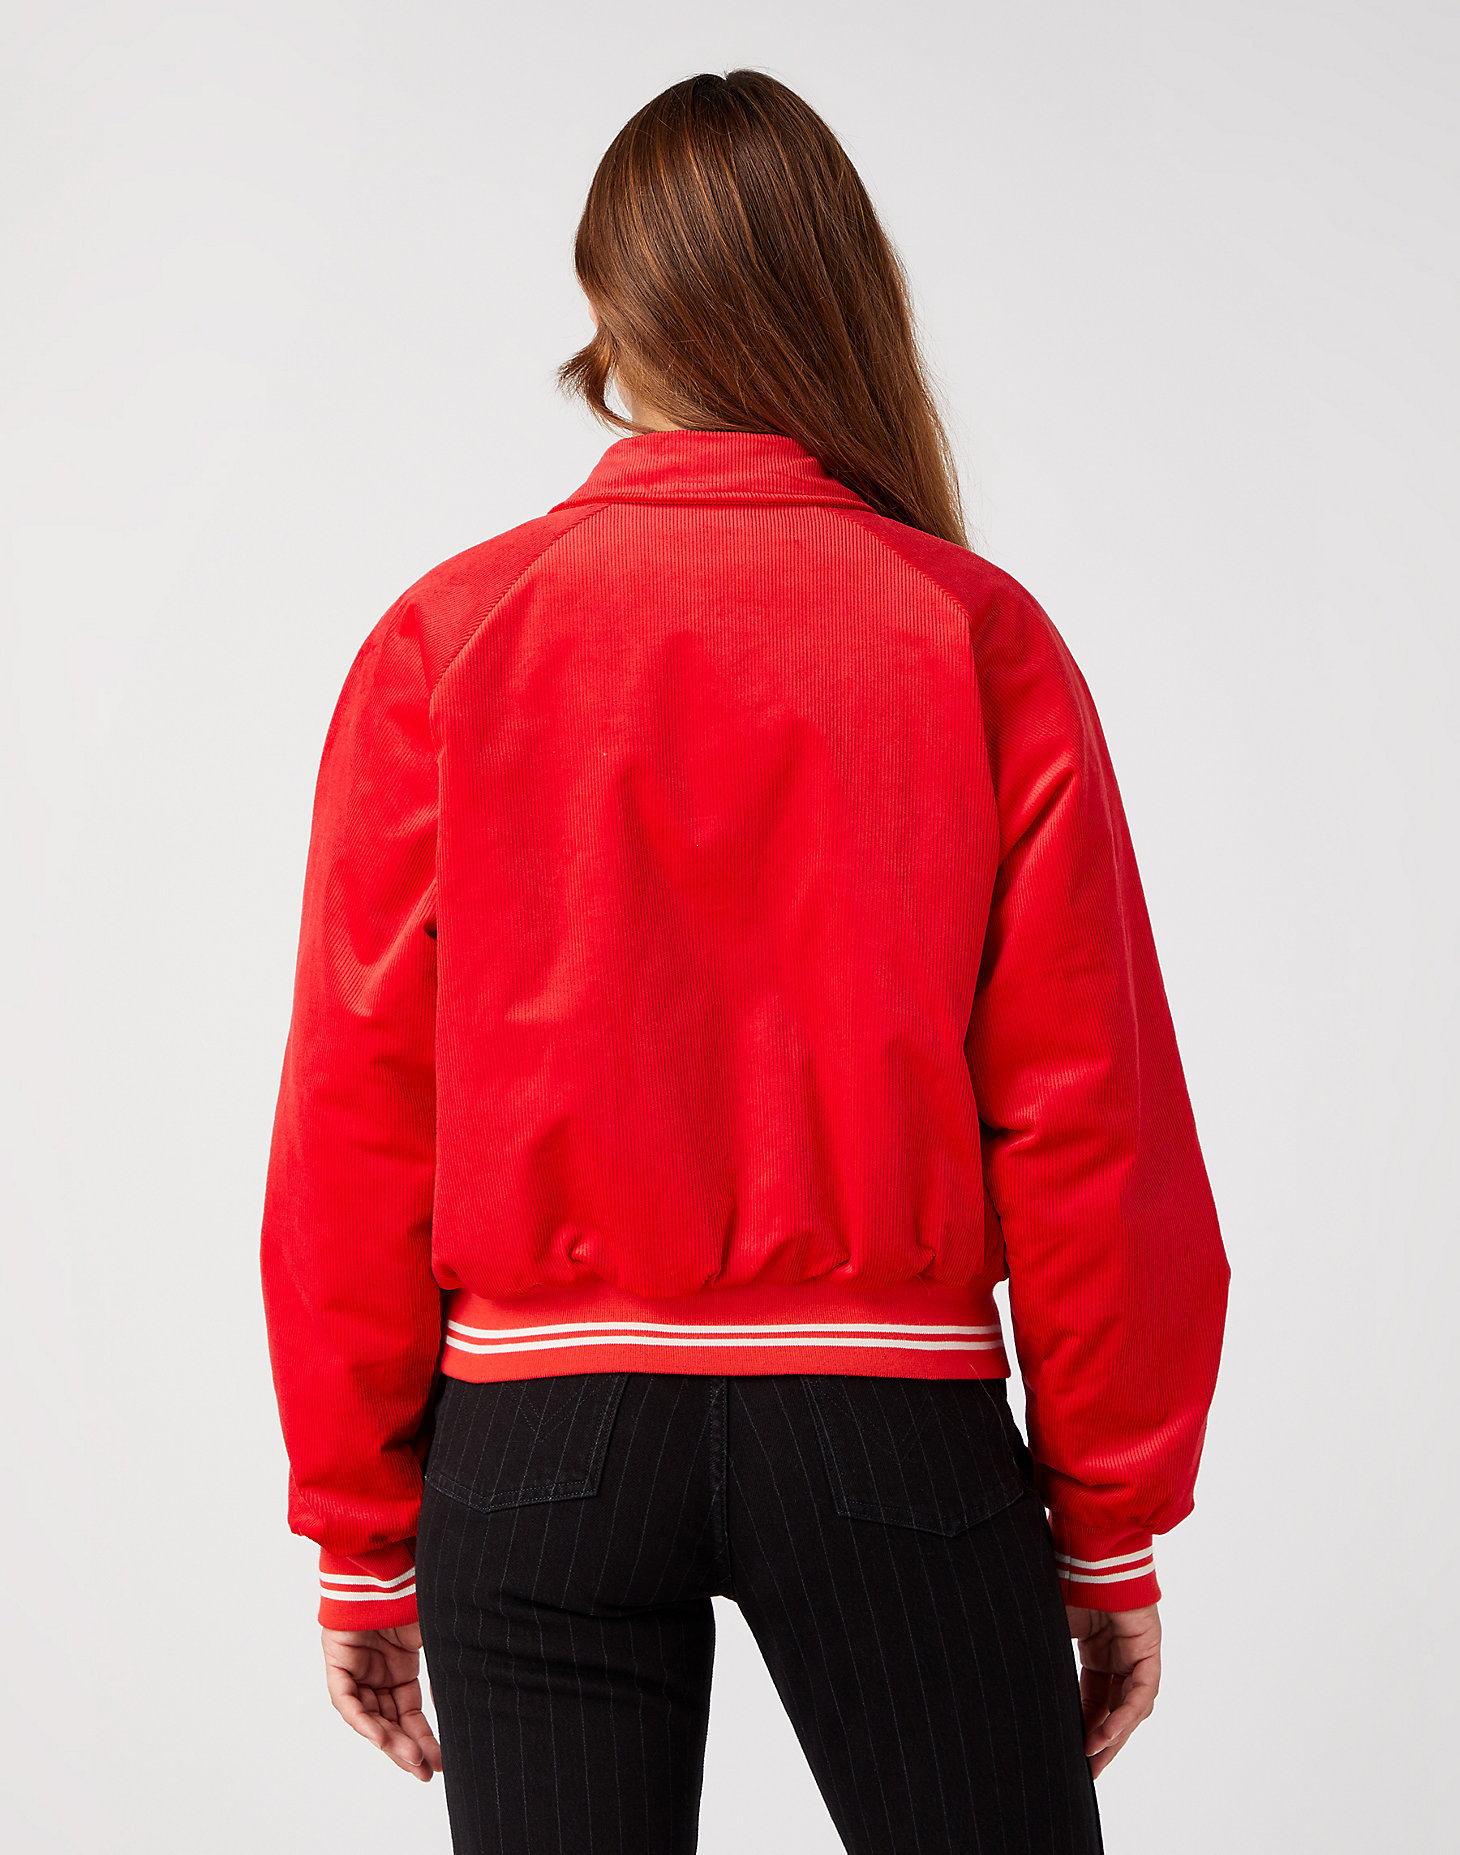 Corduroy Bomber in Formula Red alternative view 2